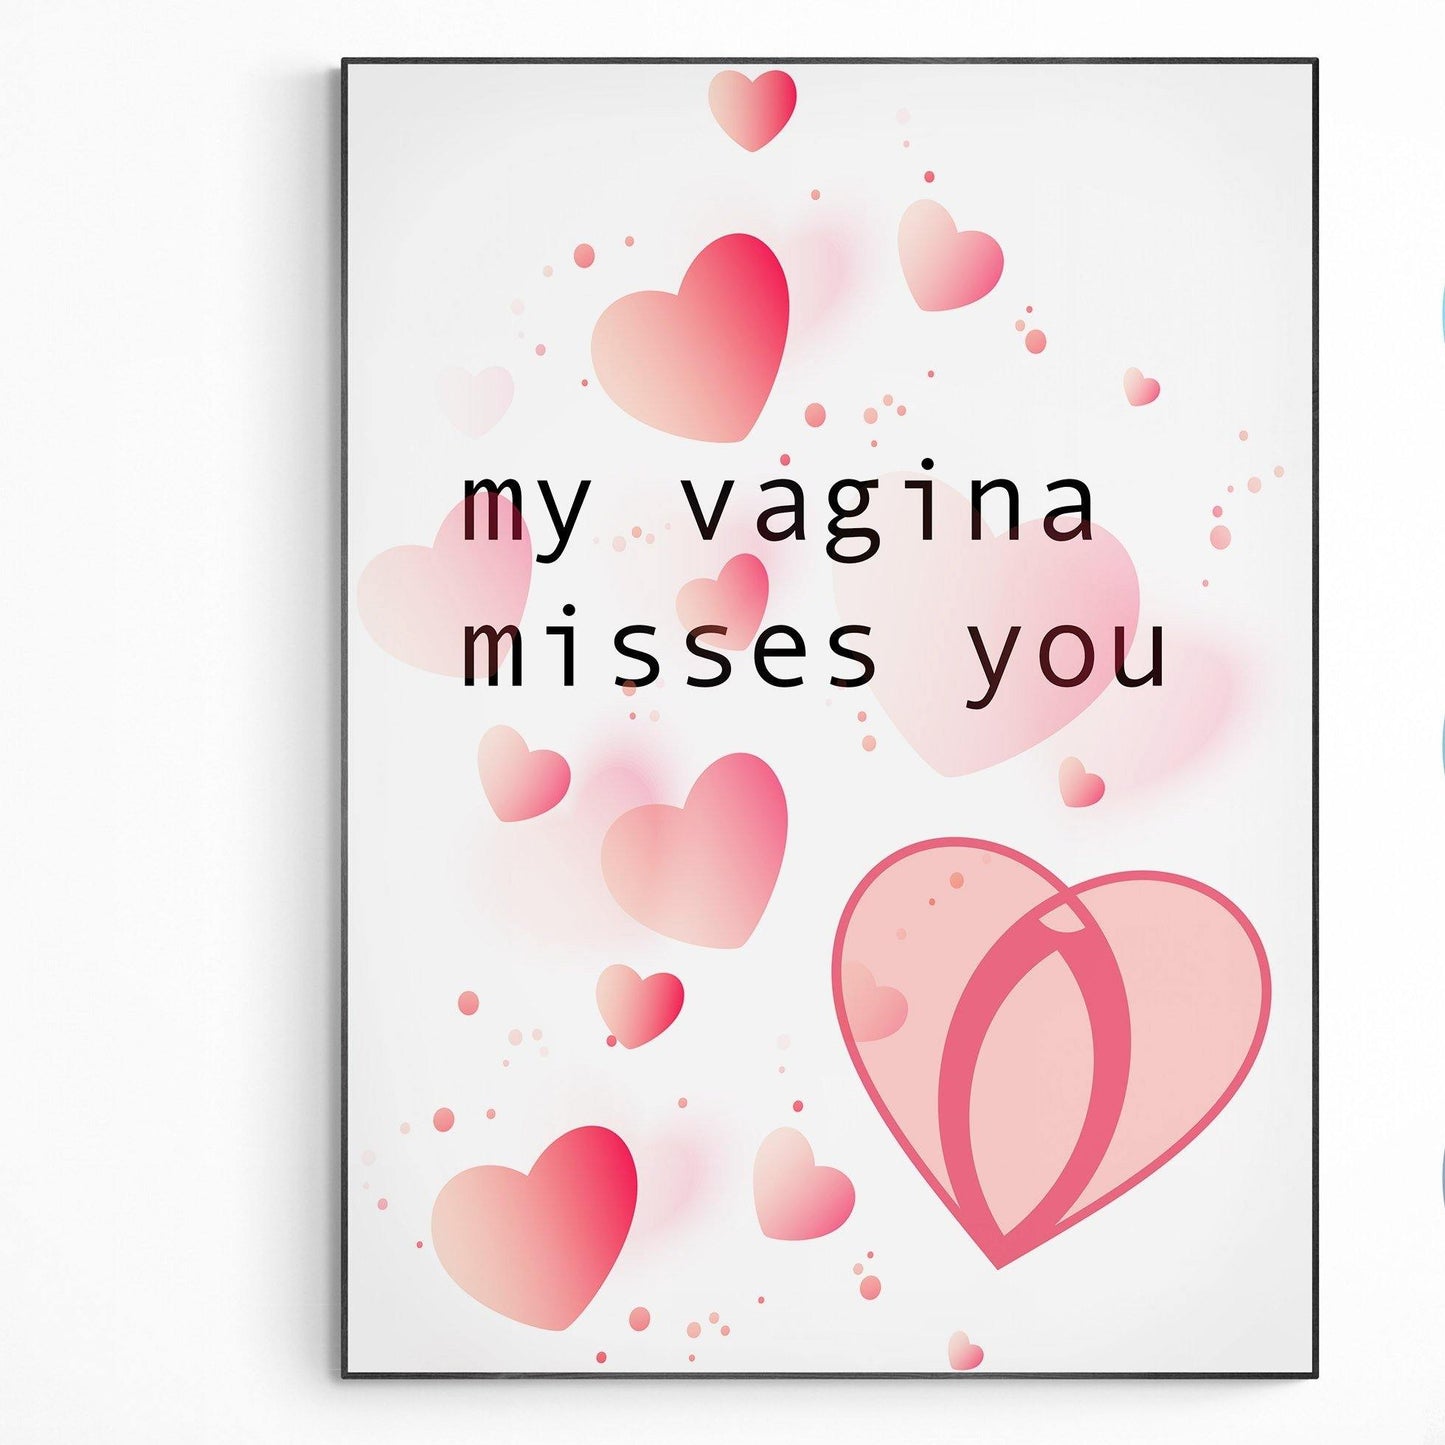 My Vagina Miss You | Original Poster Art | Fun Print Quote | Motivational Poster Wall Art Decor | Greeting Card Gifts | Variety Sizes